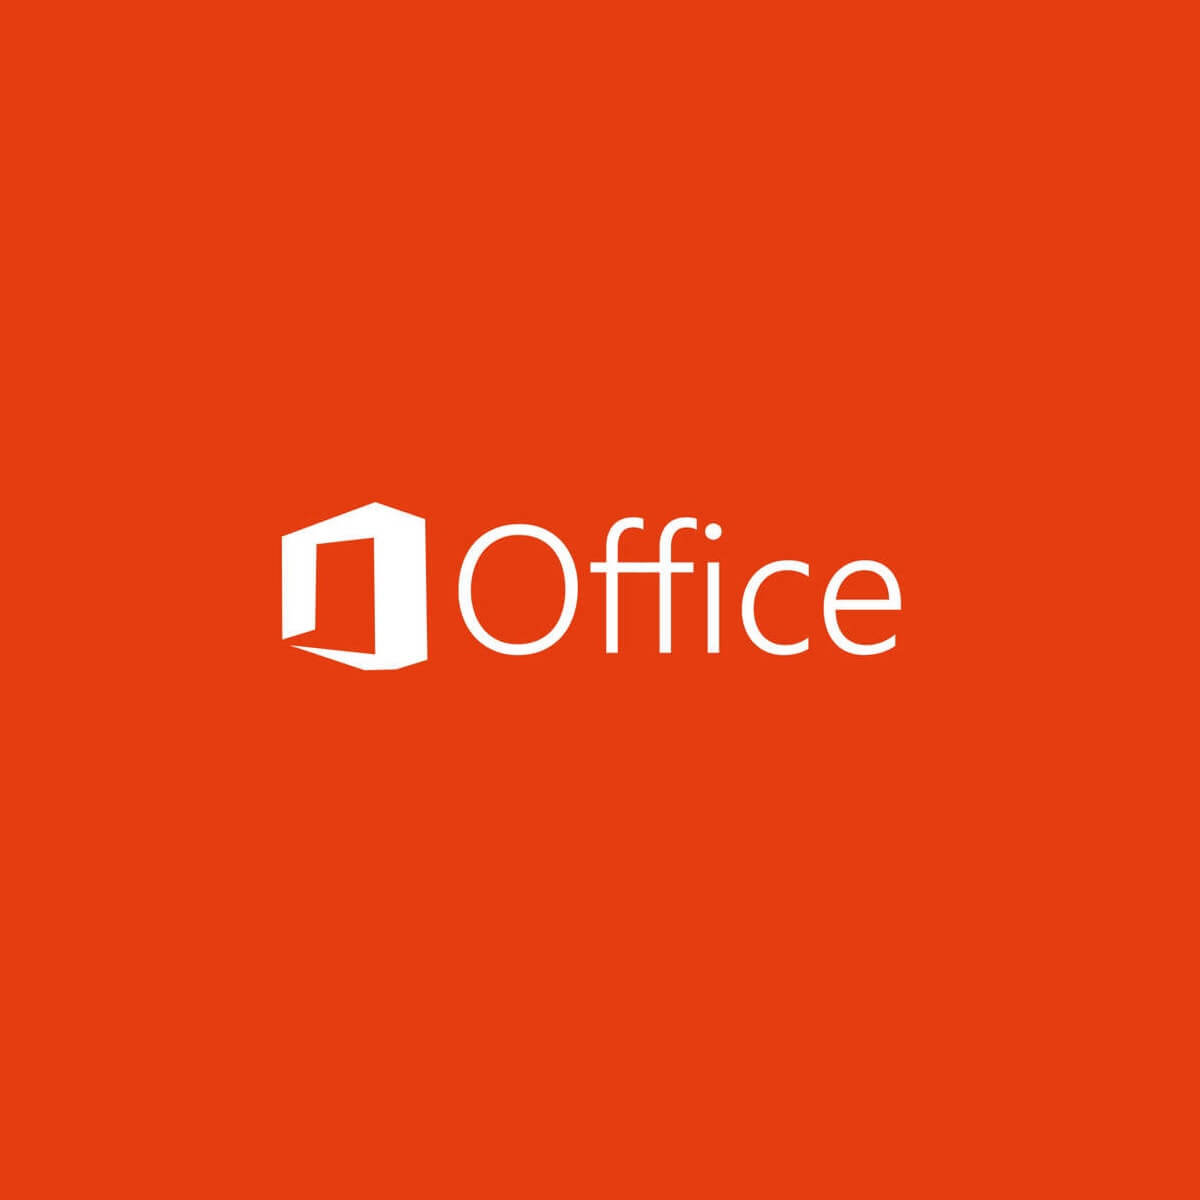 Latest Office updates come with many improvements and fixes